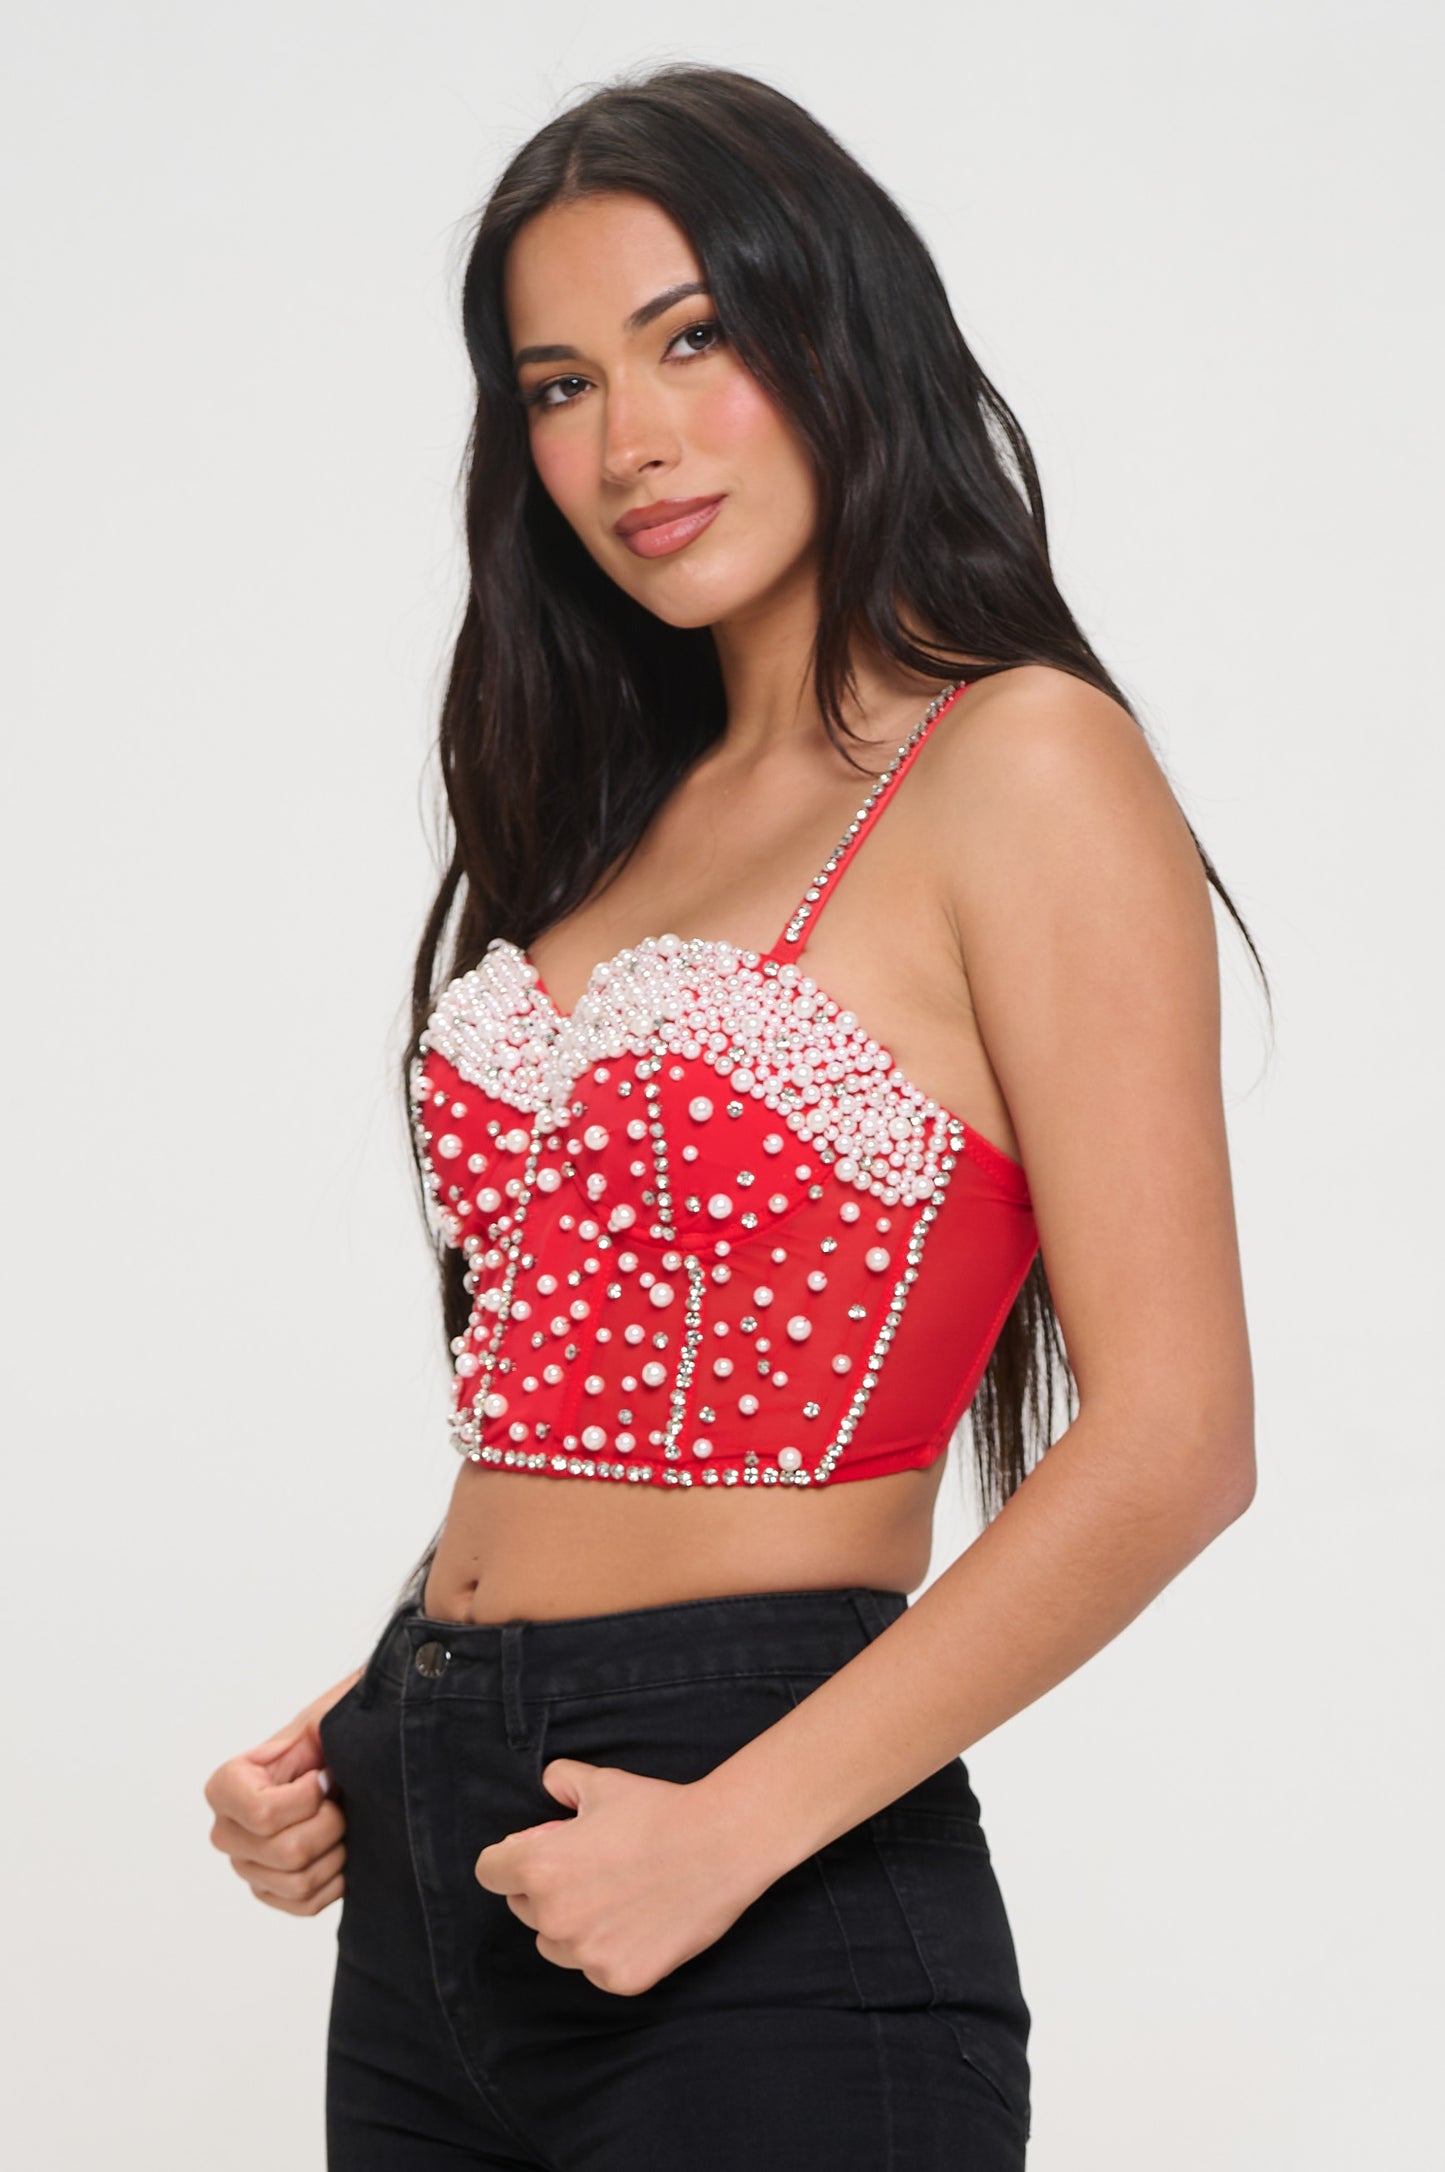 WHITE PEARL RHINETONE EMBELLISHED BUSTIER TOP